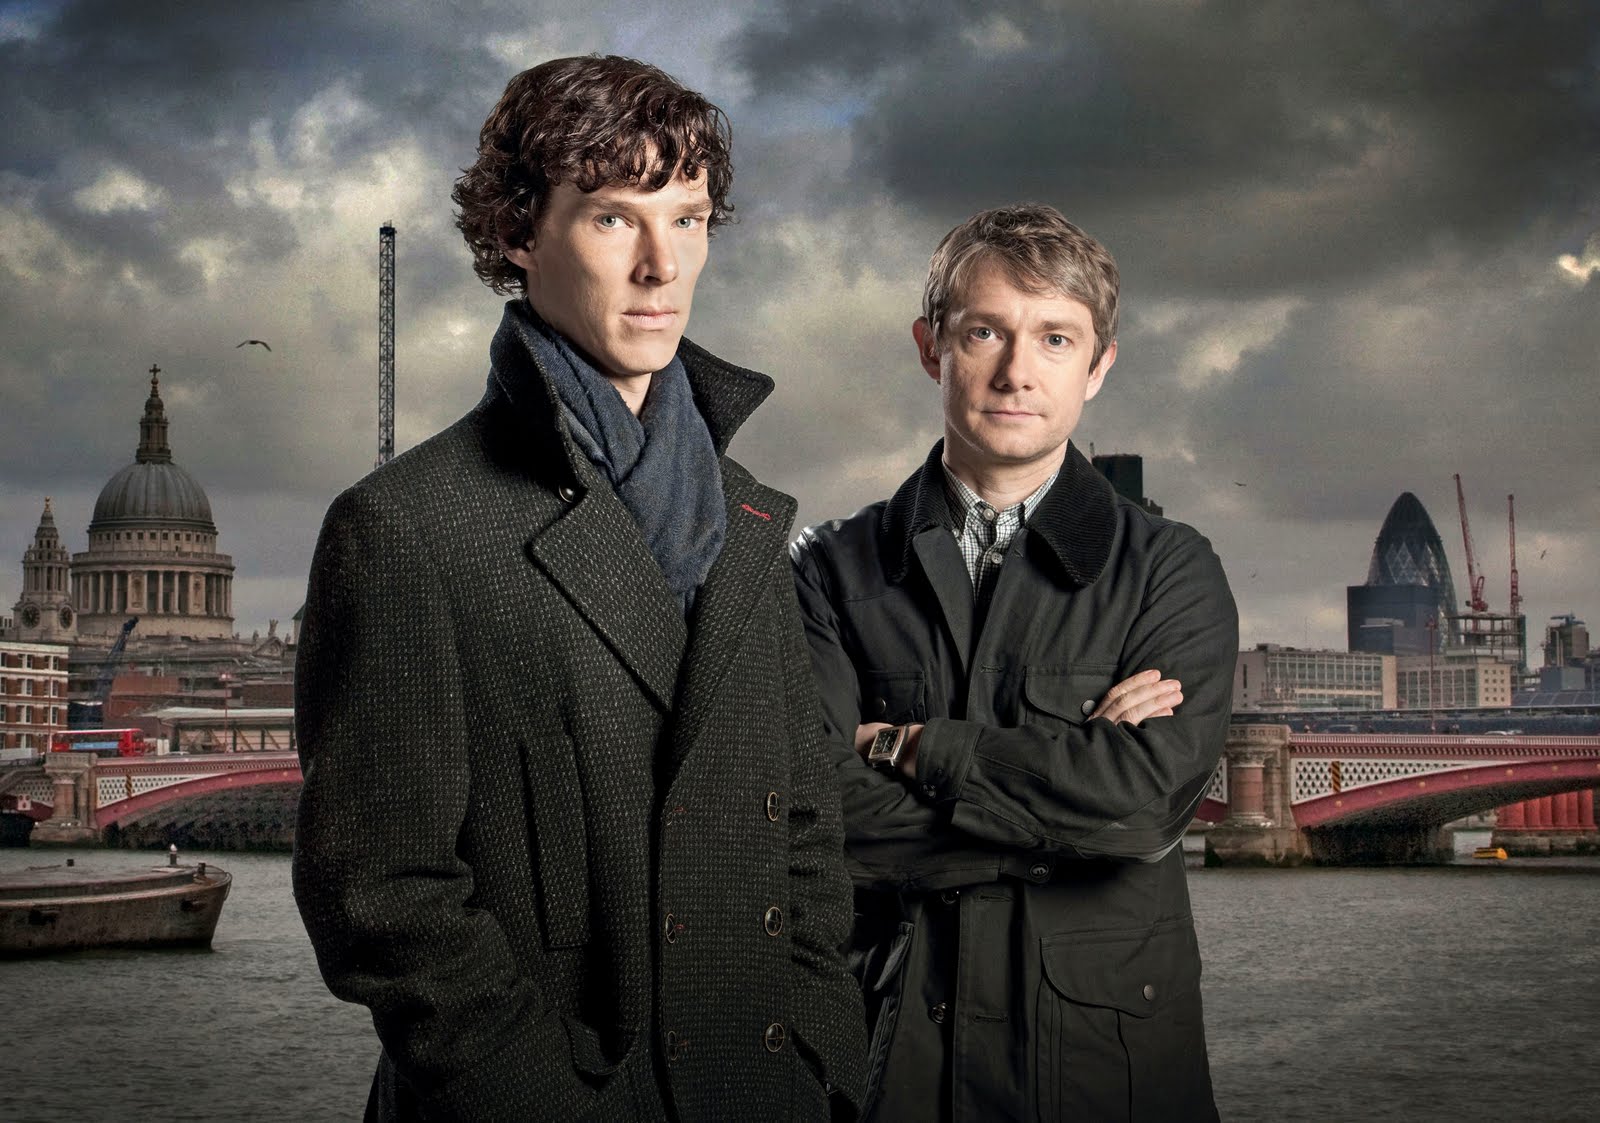 Love intelligent mystery TV shows like Sherlock full of crime & sardonic humor? Check out five more fabulous shows to add to your binge watching list!